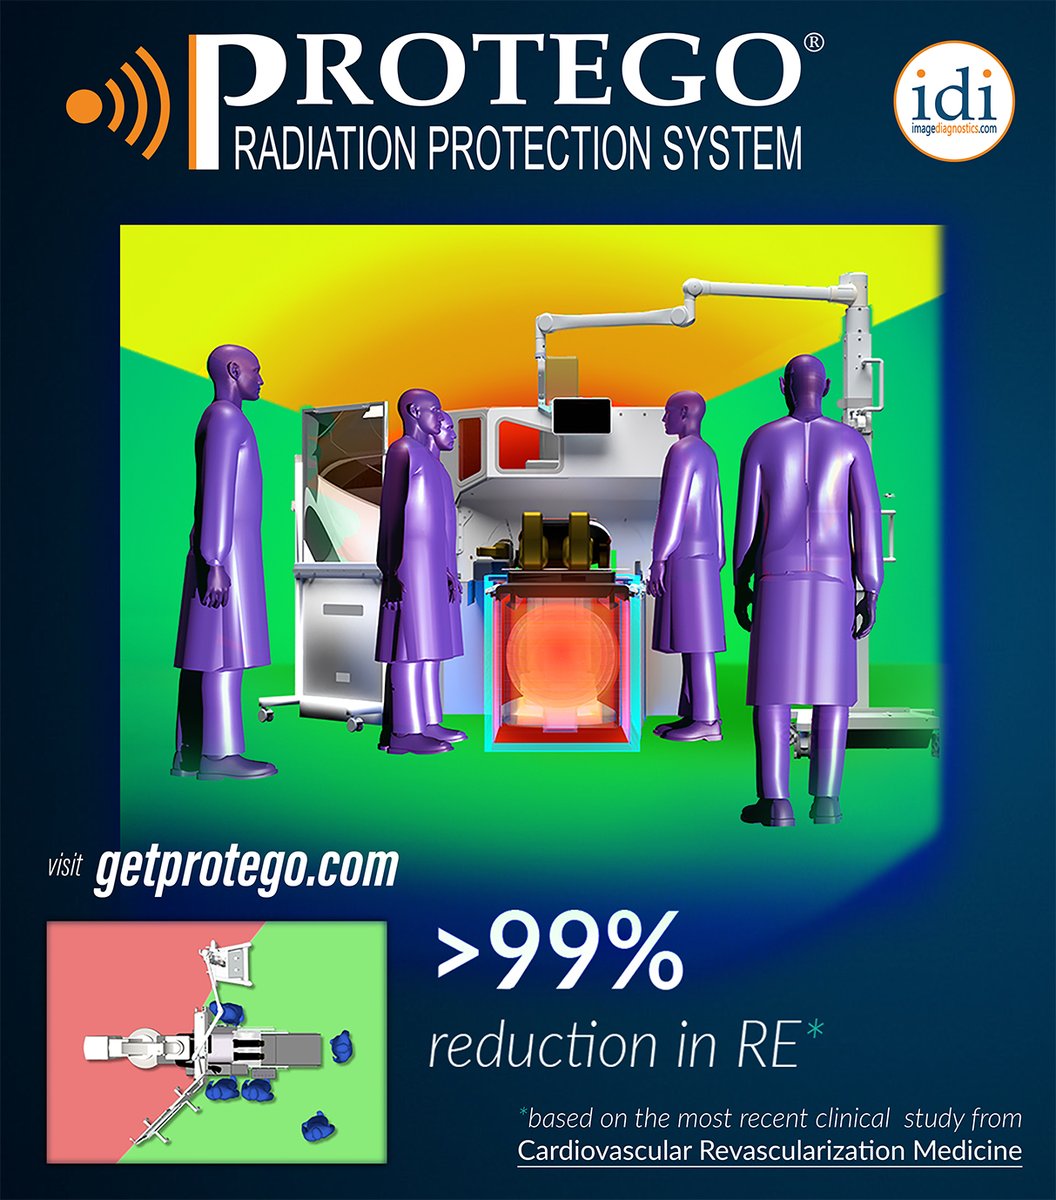 BOX OUT the radiation with our Radiation Protection System! #ApronFreeImaging #RadiationProtection #CardioTwitter